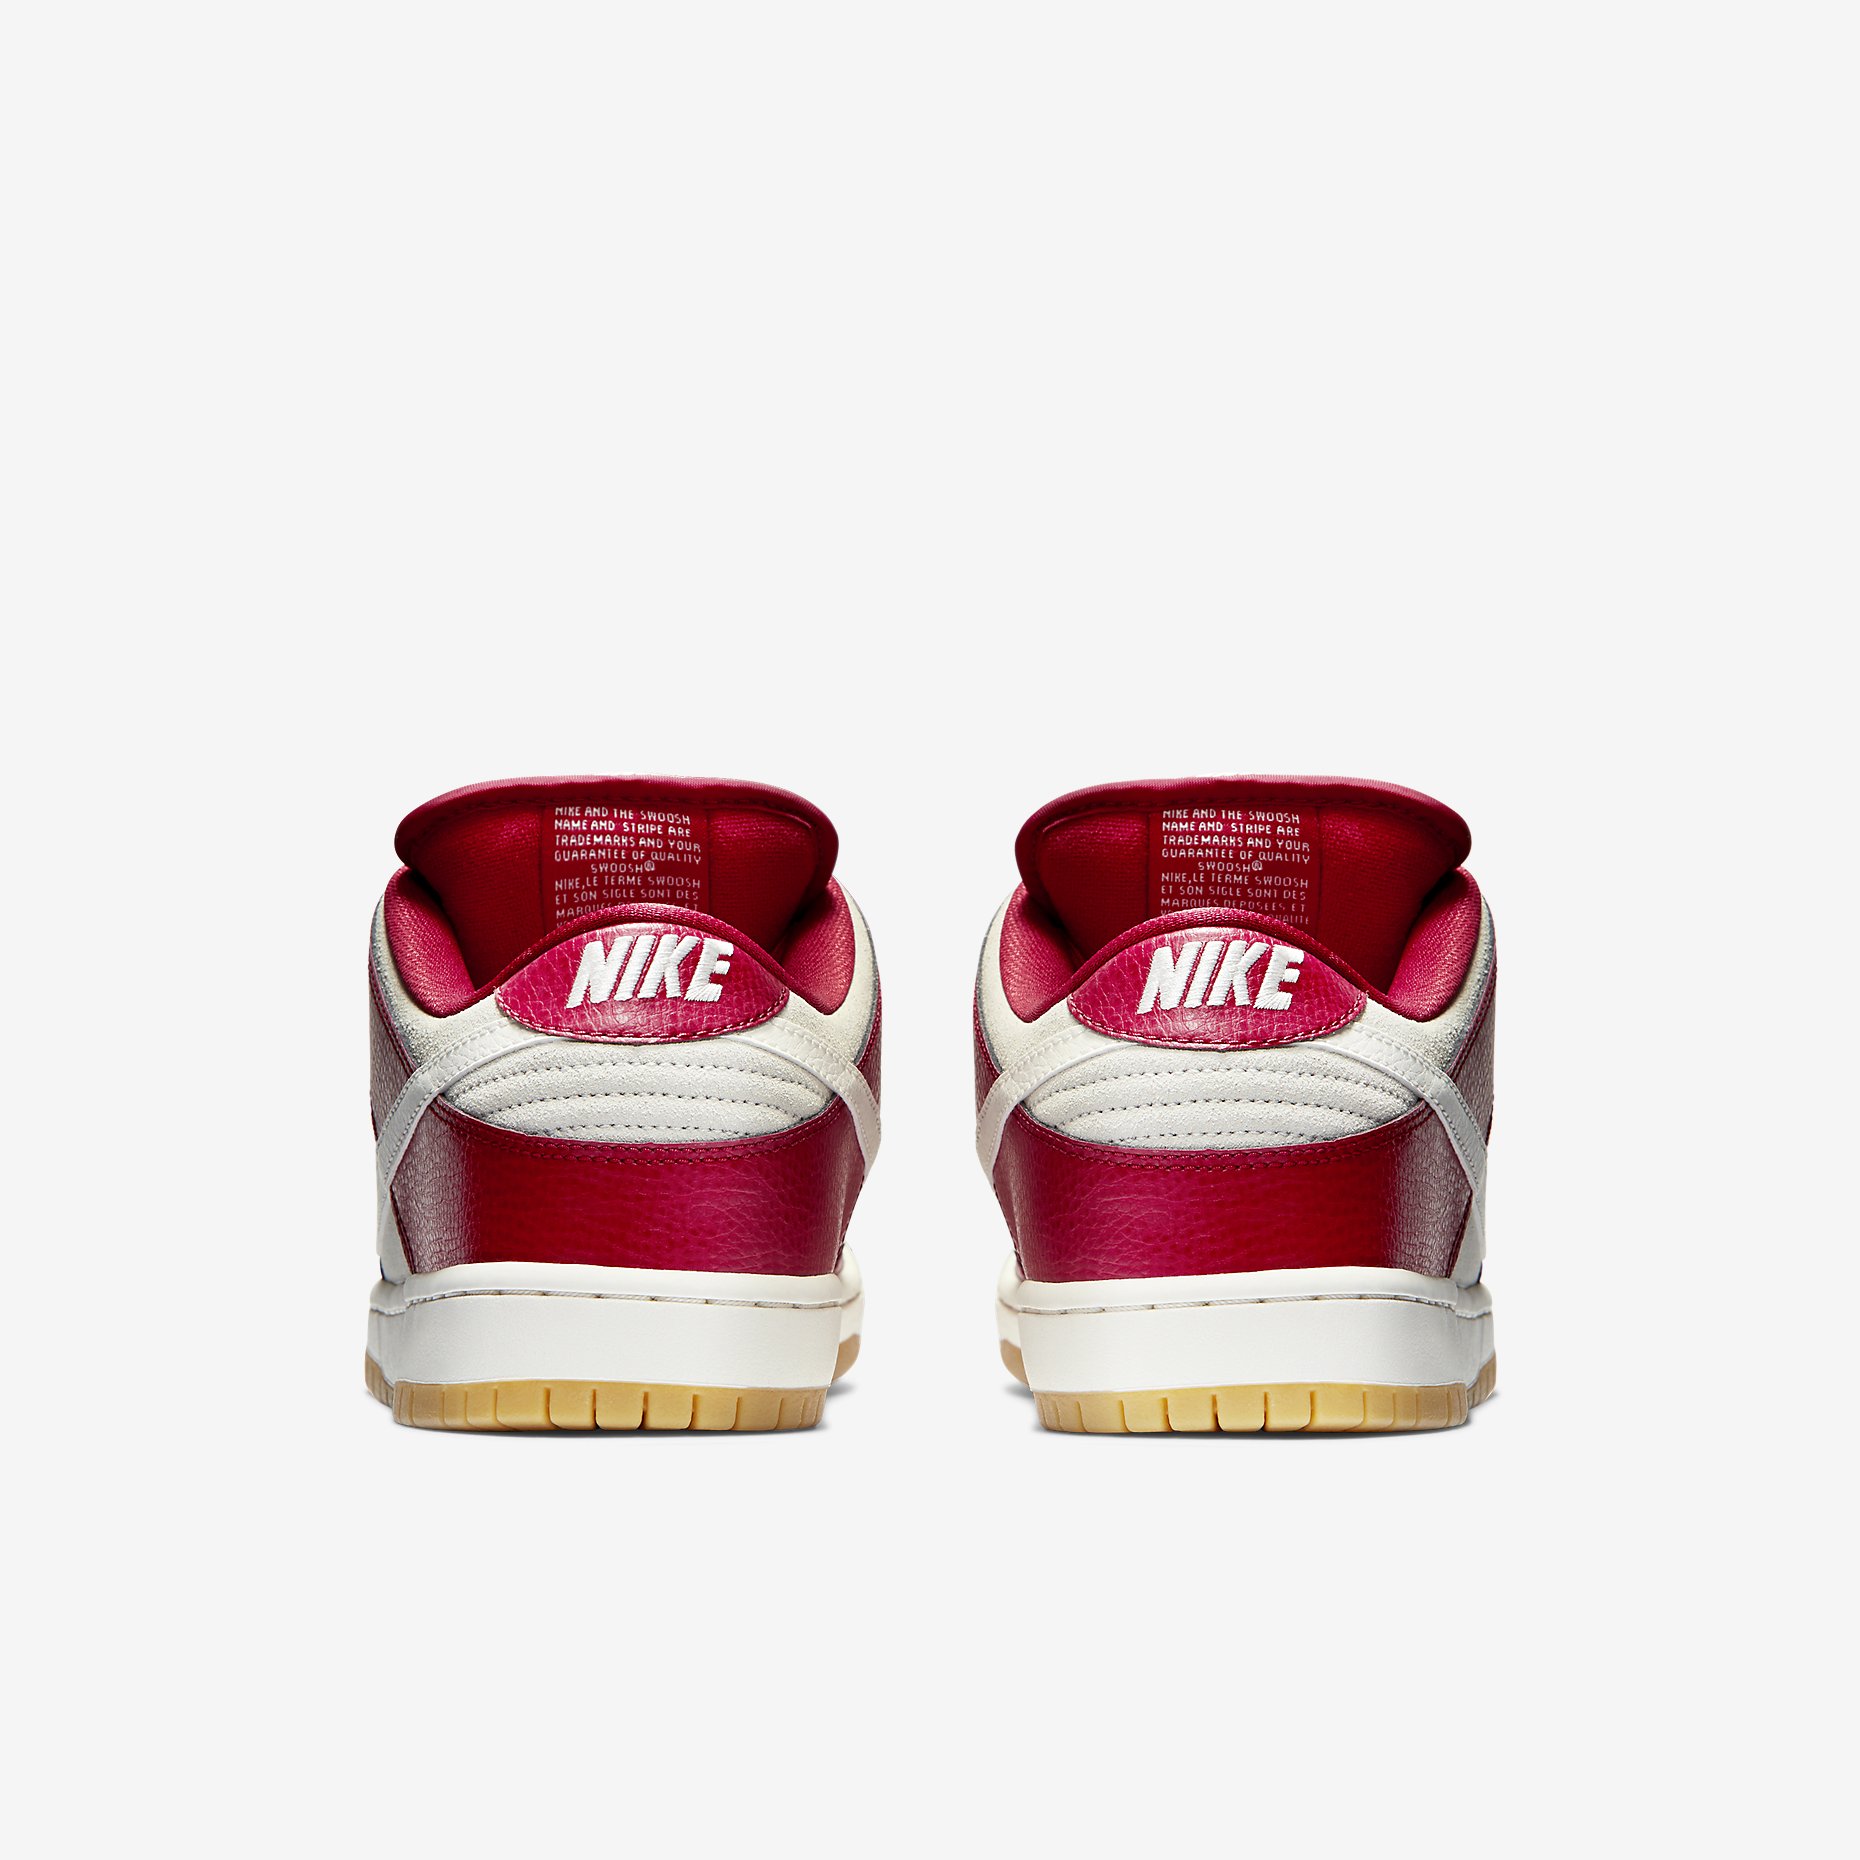 Two Nike Dunk Low SB Colorways on Clearance at Nike - Air 23 - Air ...